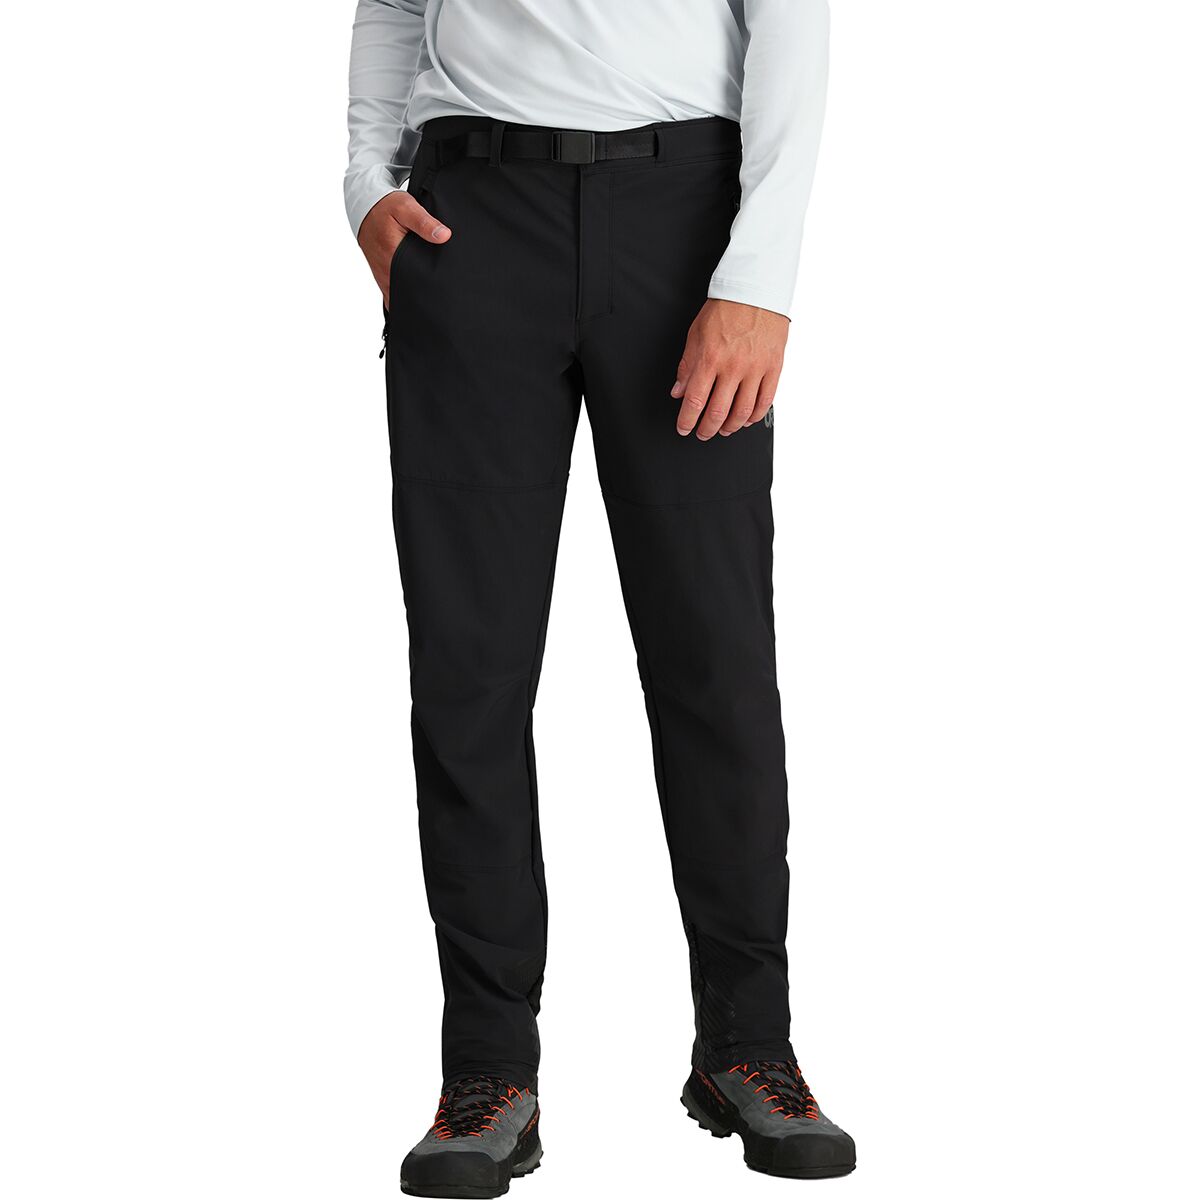 Outdoor Research Cirque Lite Pant - Men's - Clothing